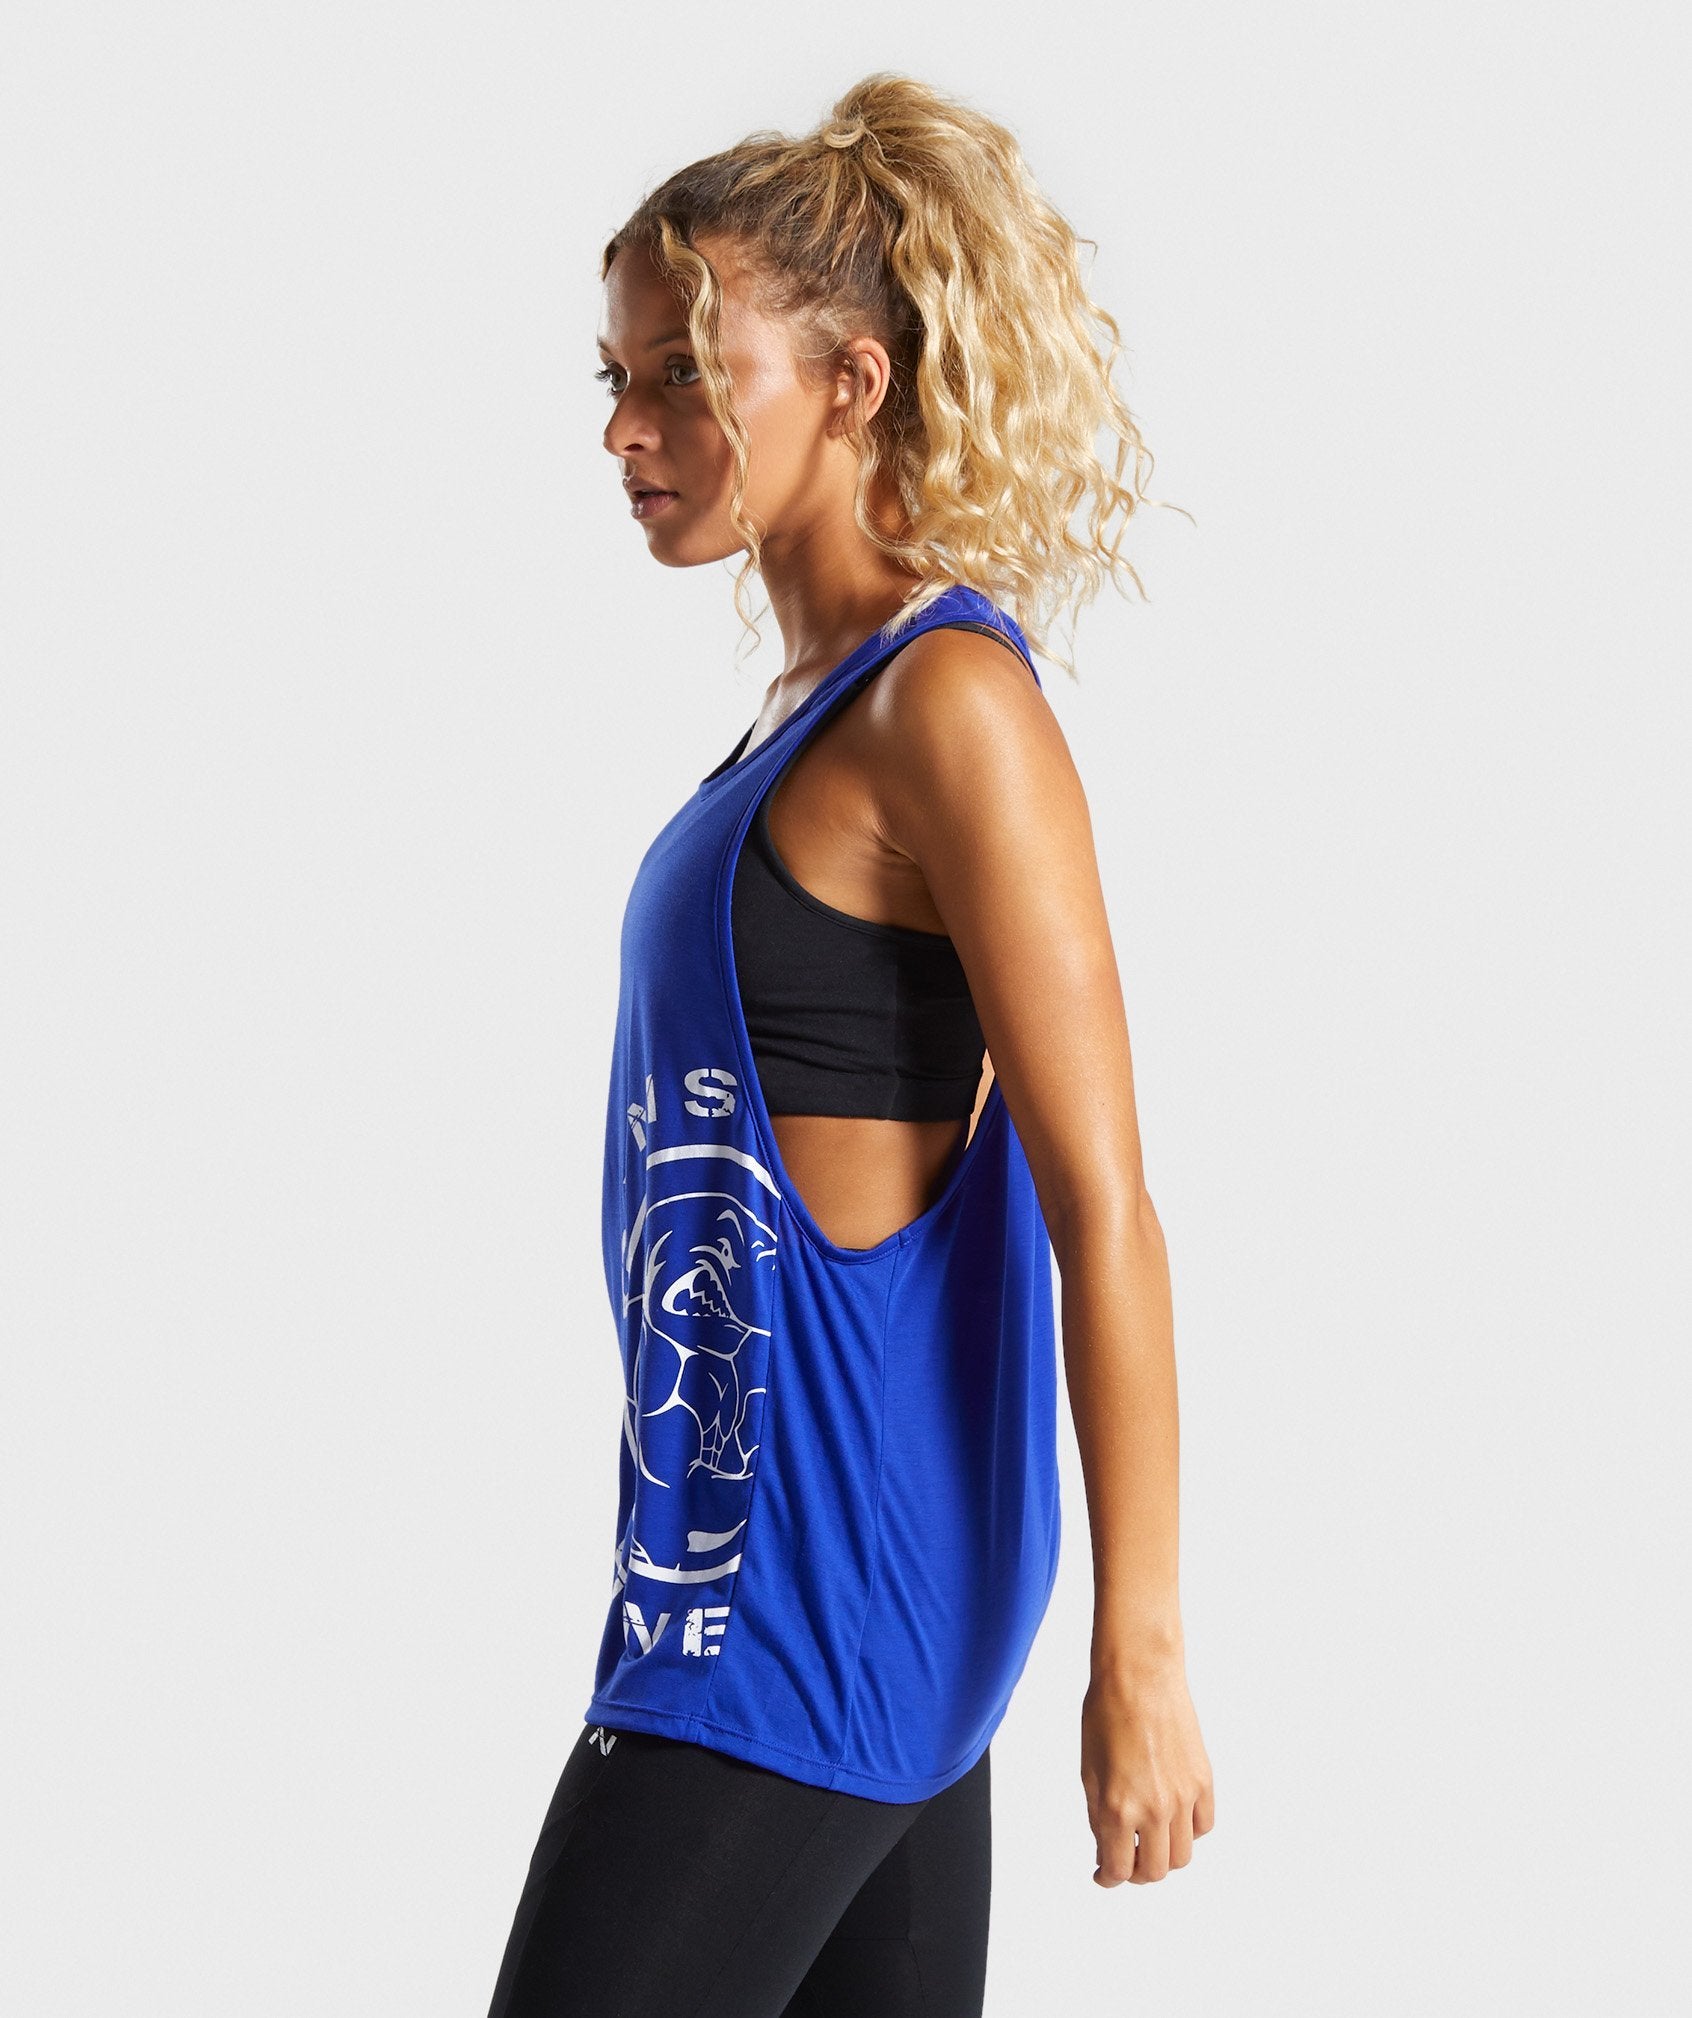 Legacy Fitness Drop Arm Vest in Blue - view 3